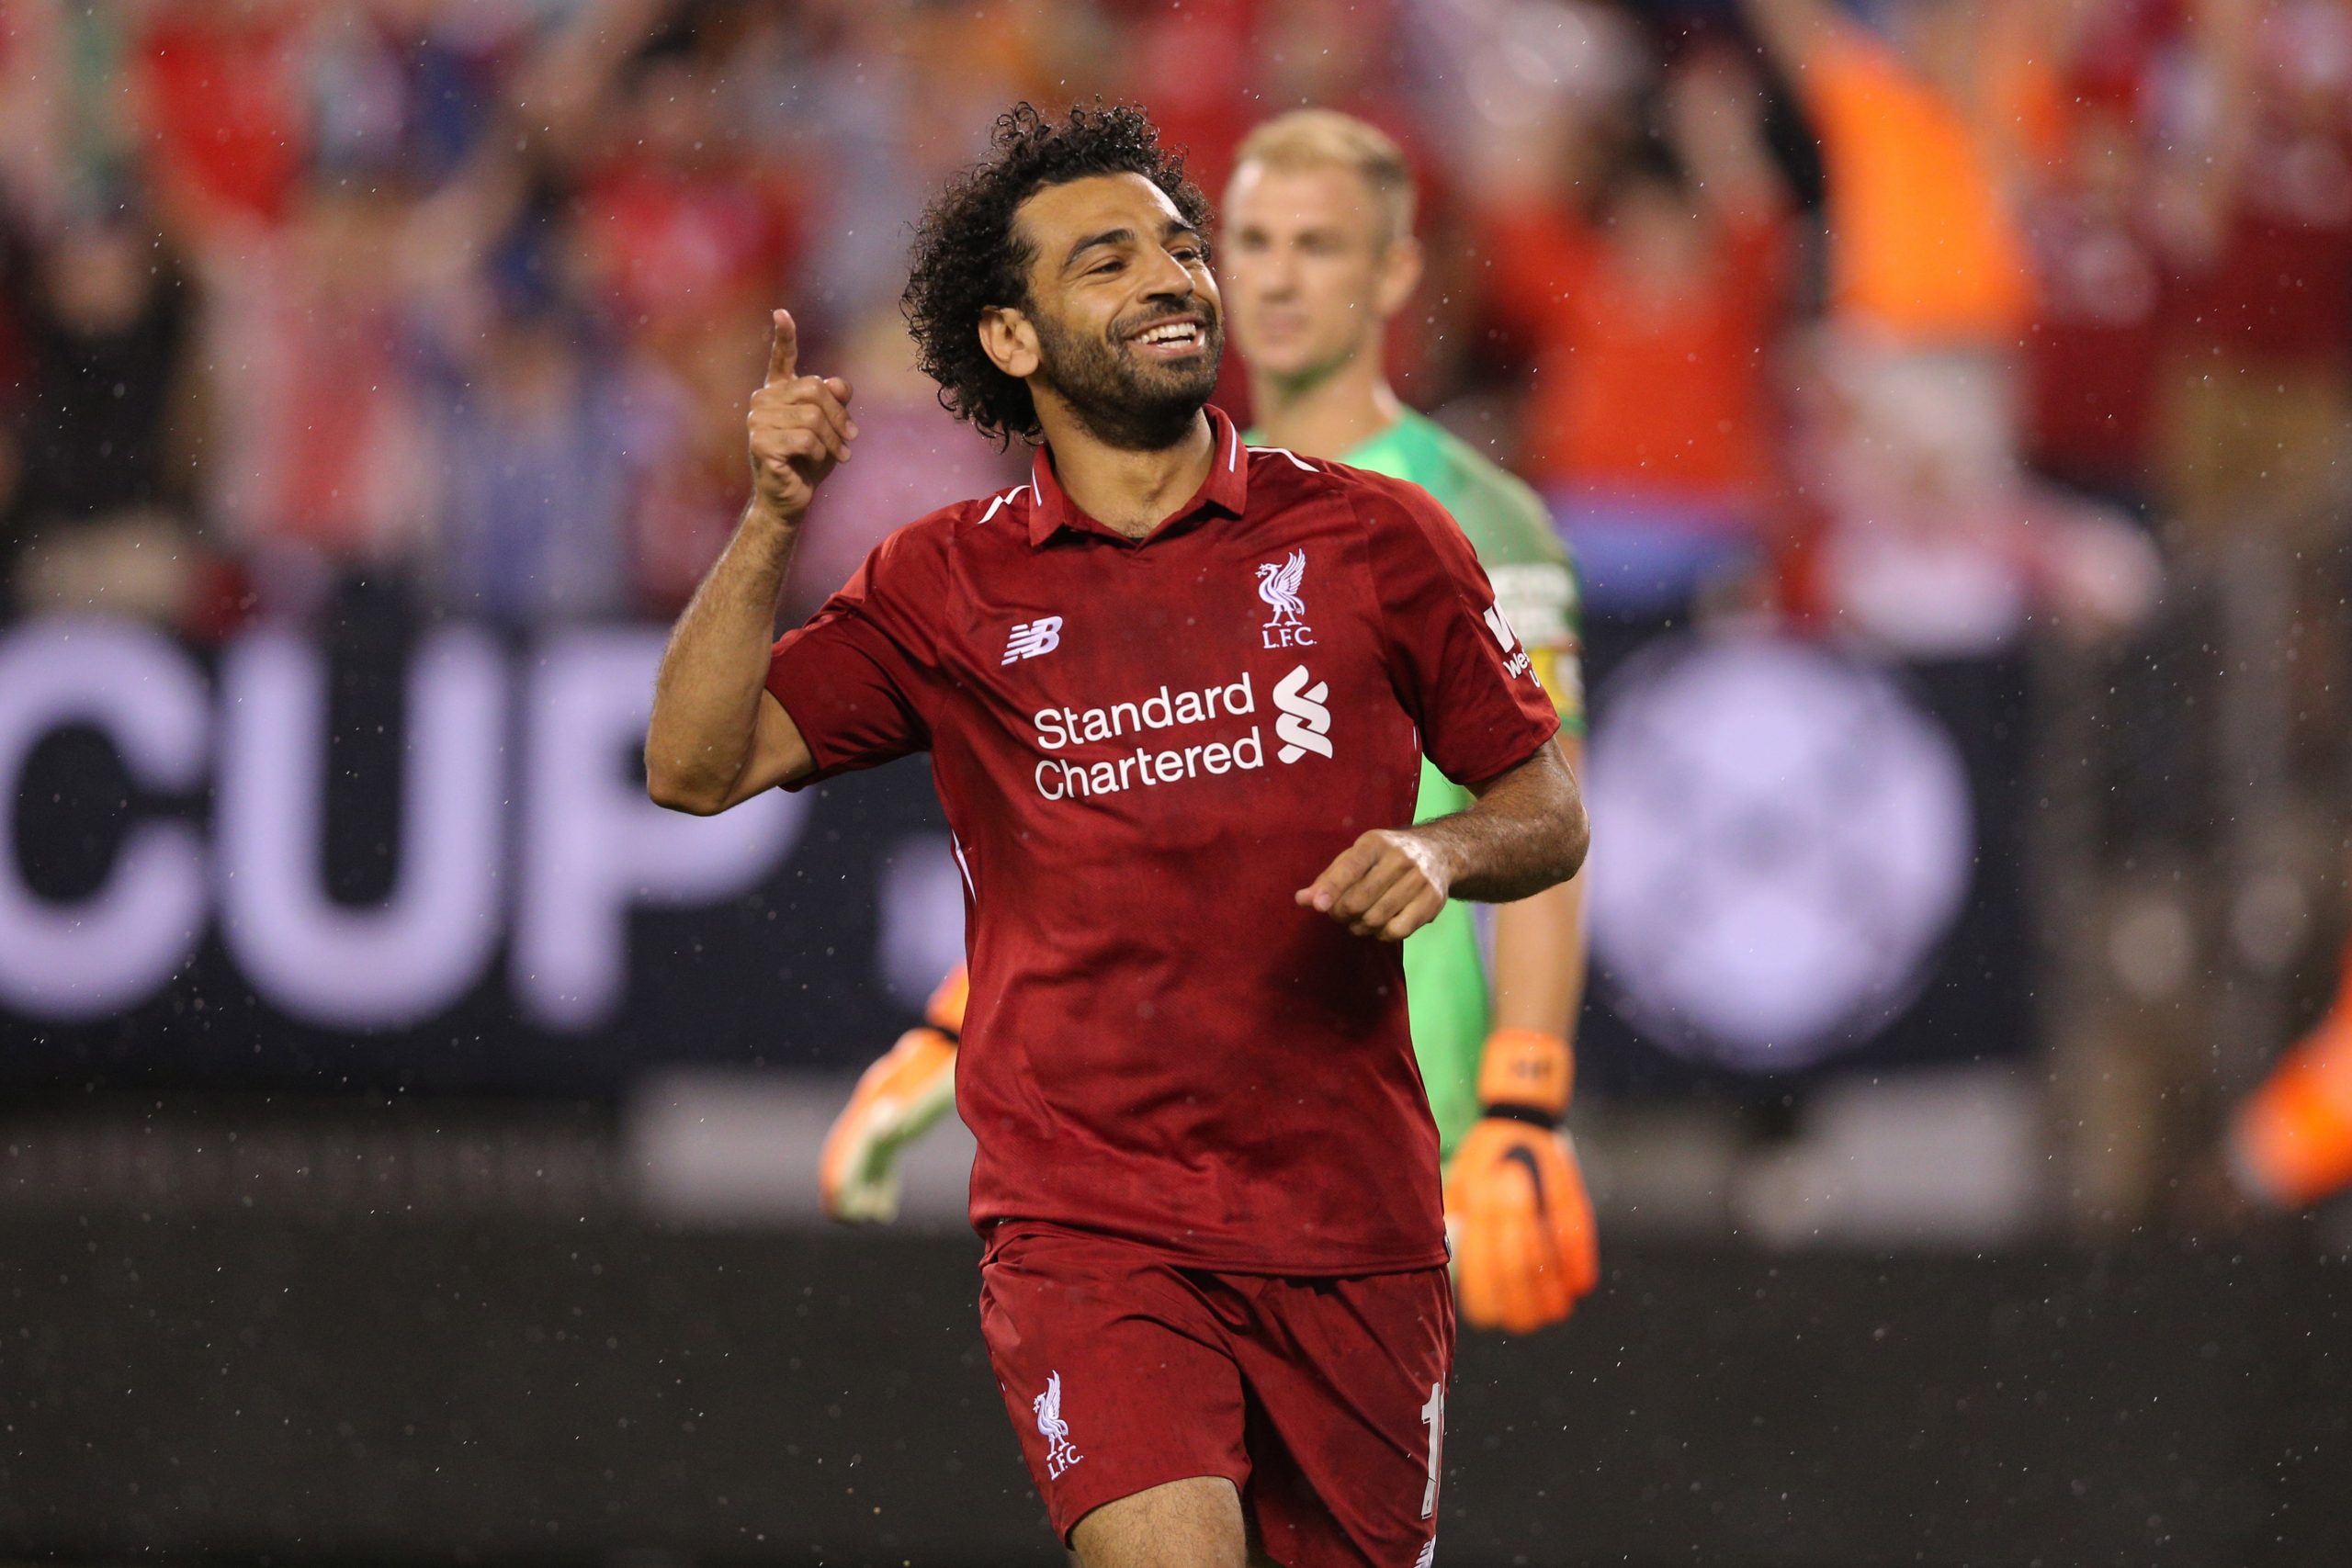 Soccer: International Champions Cup-Manchester City at Liverpool FC